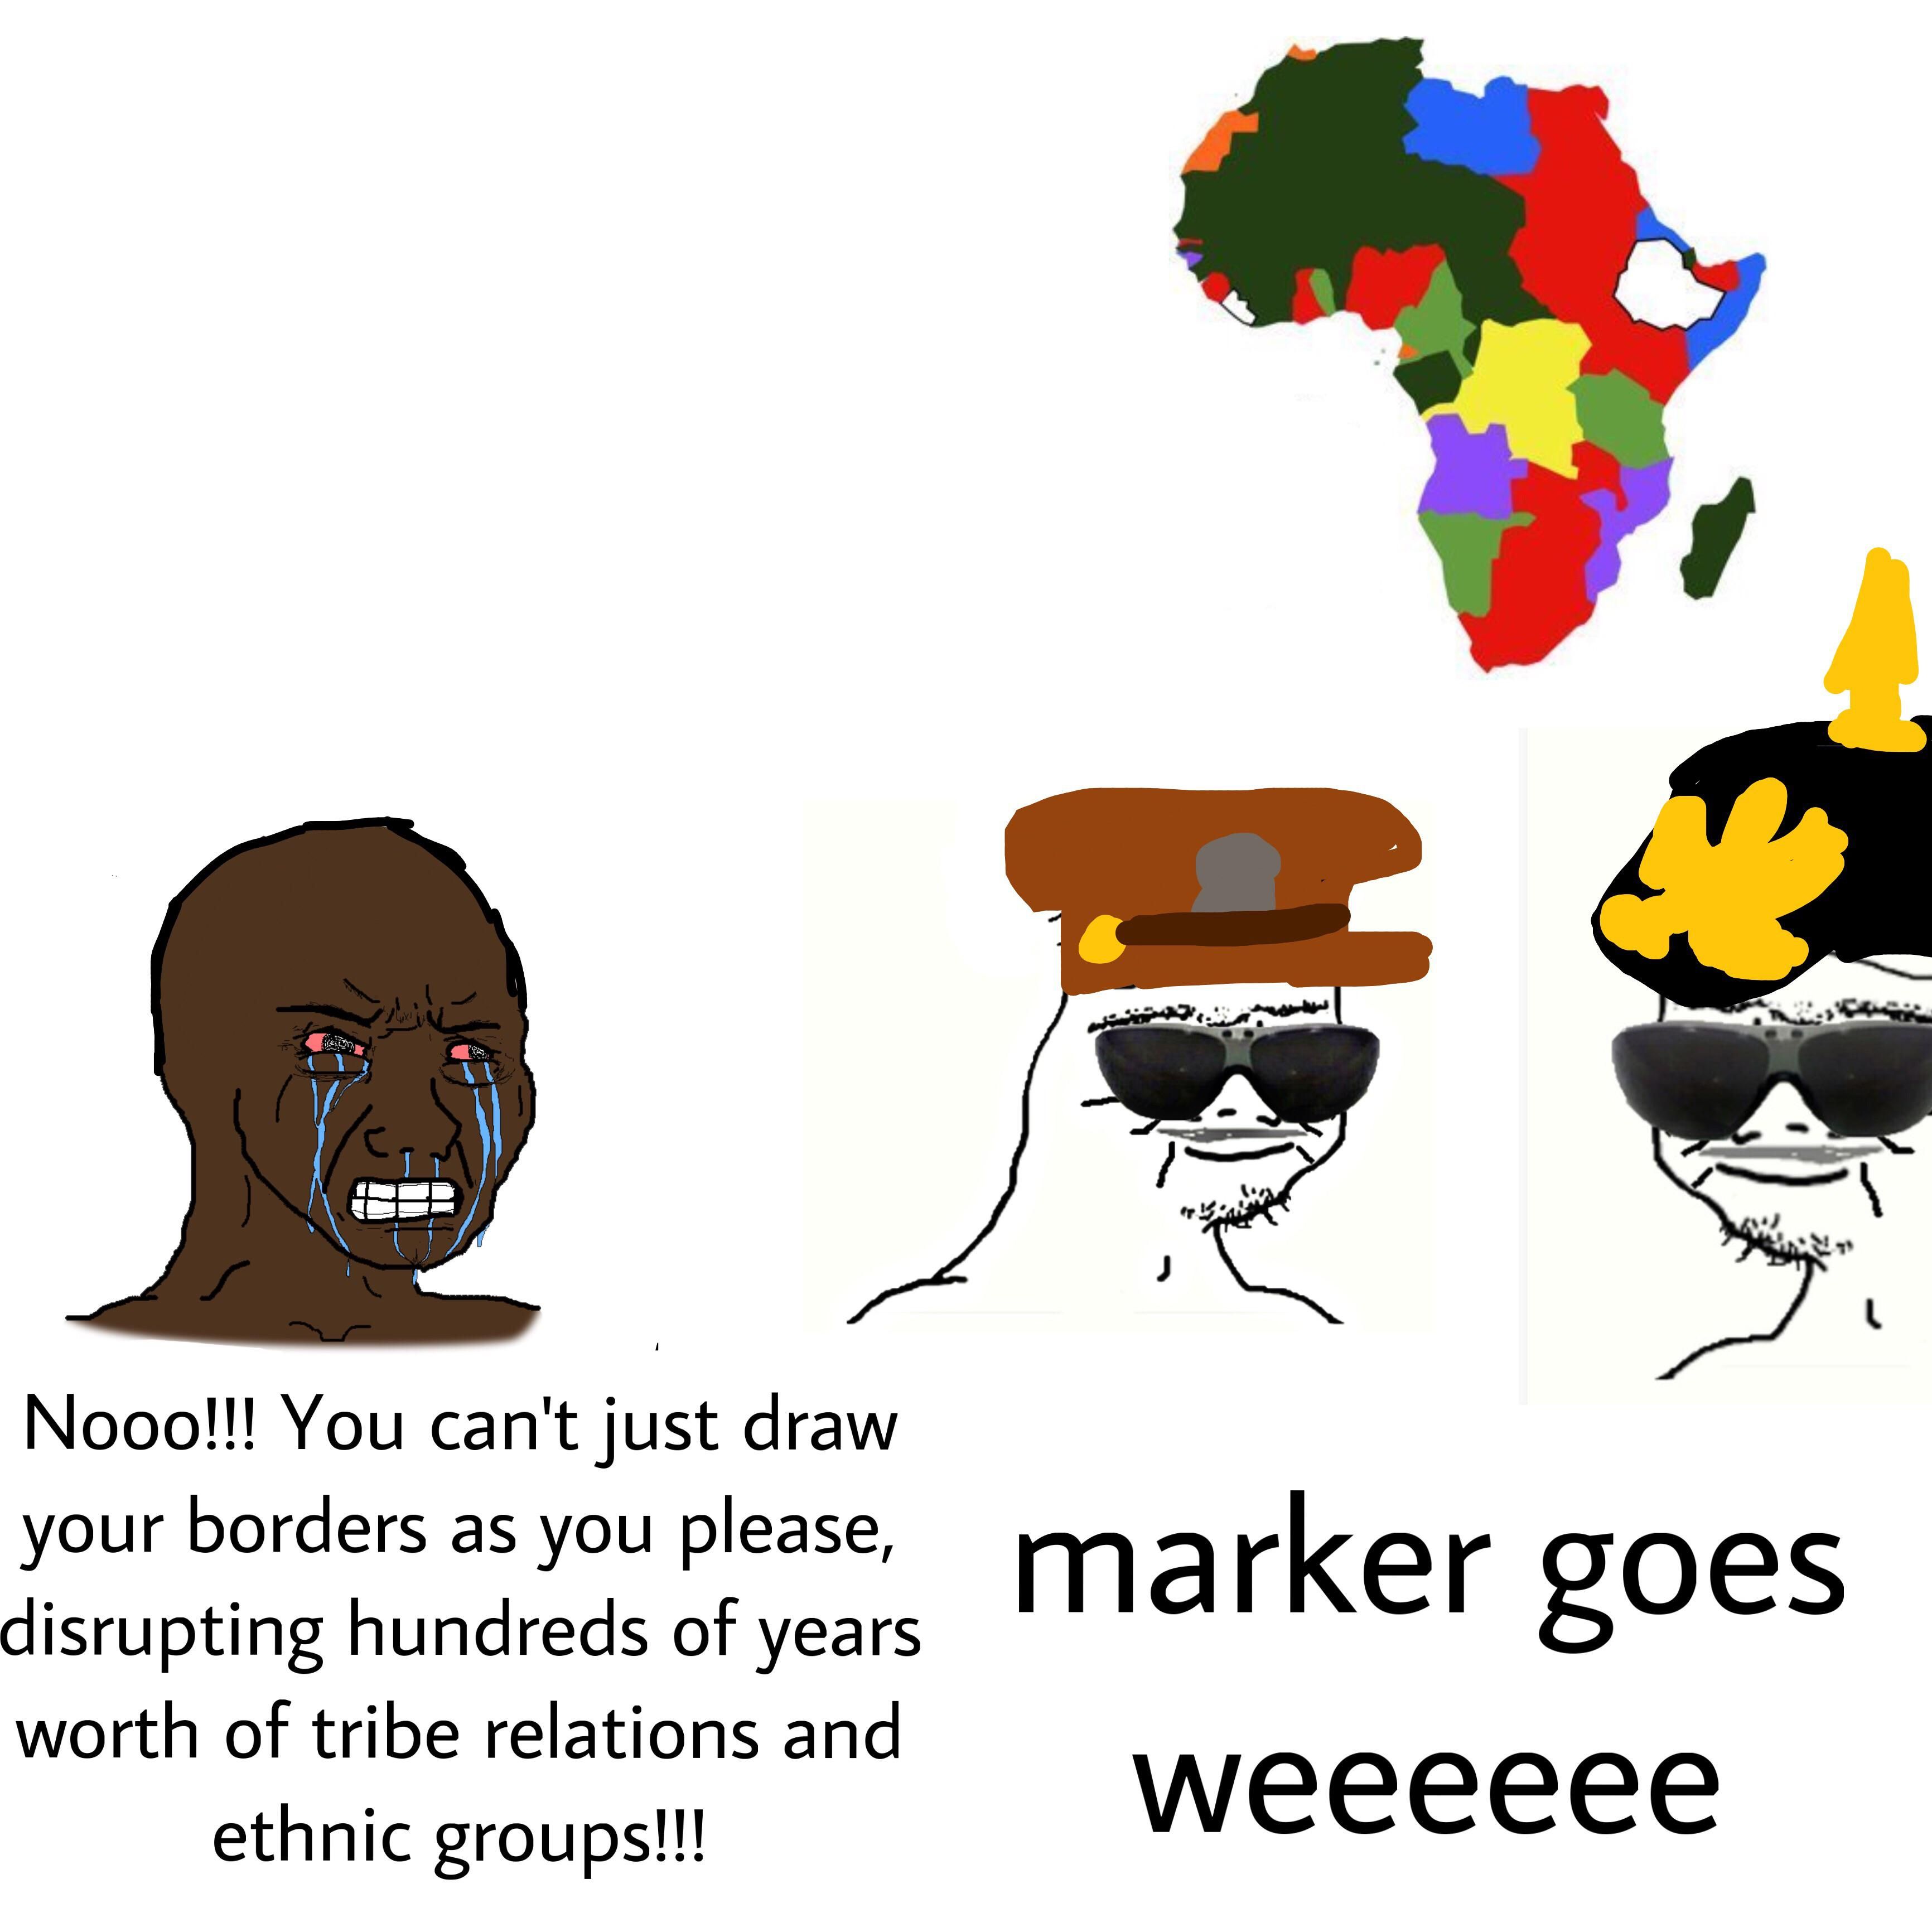 Luckily colonisation never led to something bad, right?